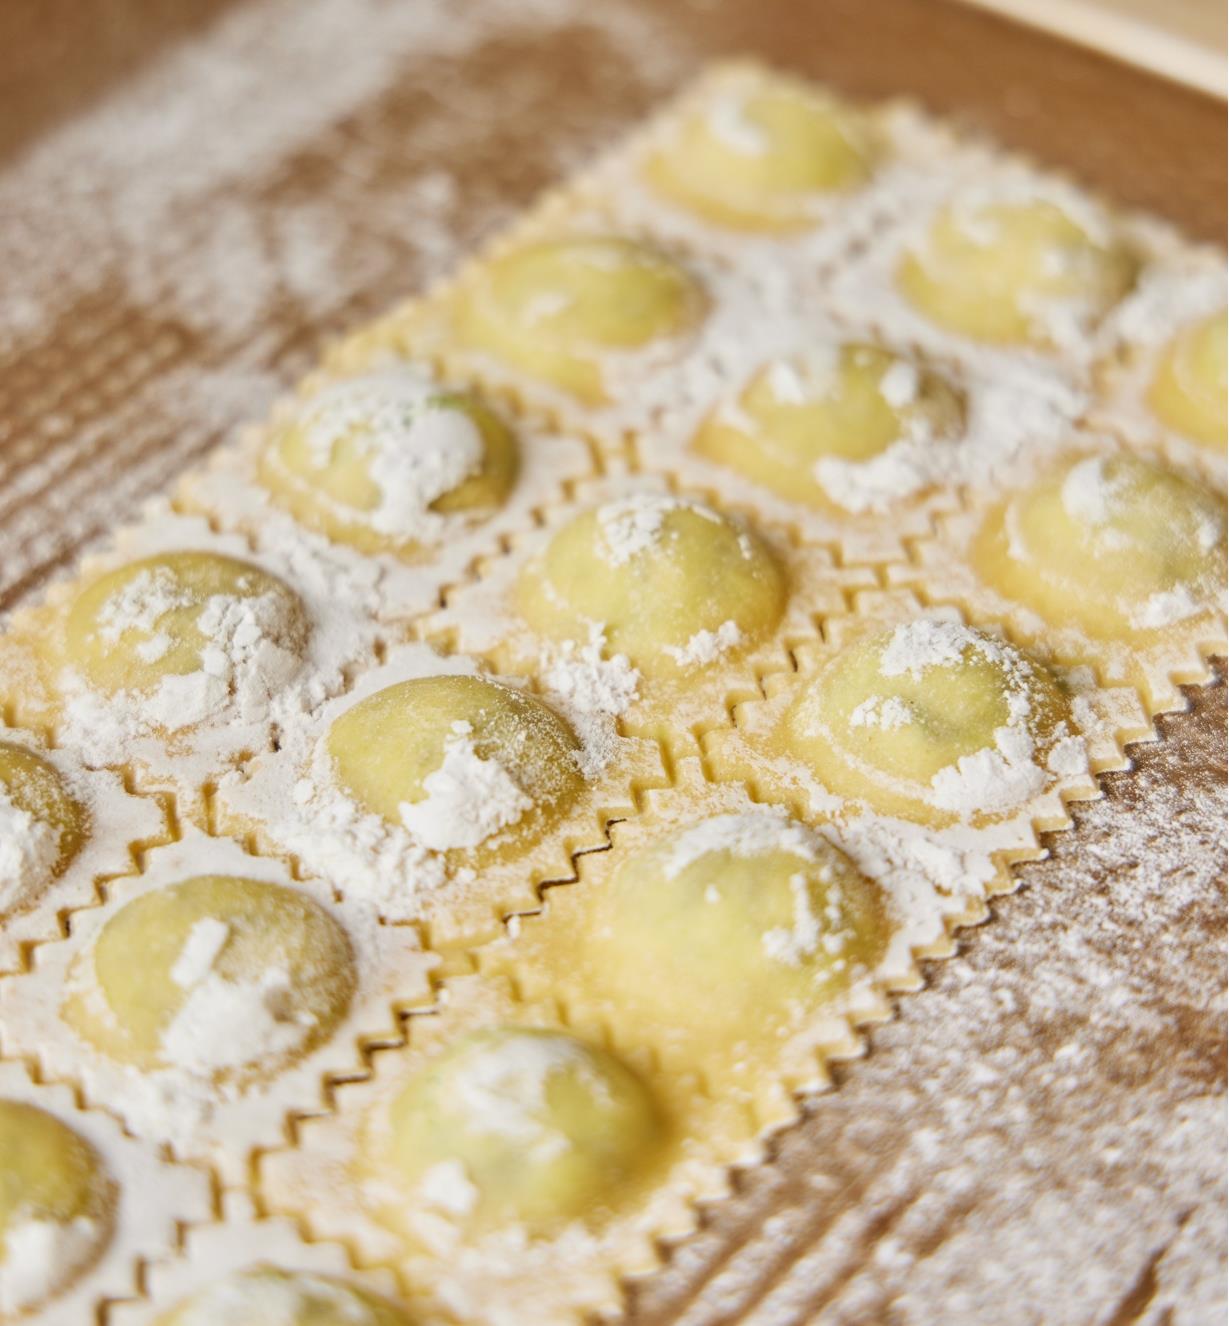 Close-up view of ravioli pieces released from the mold